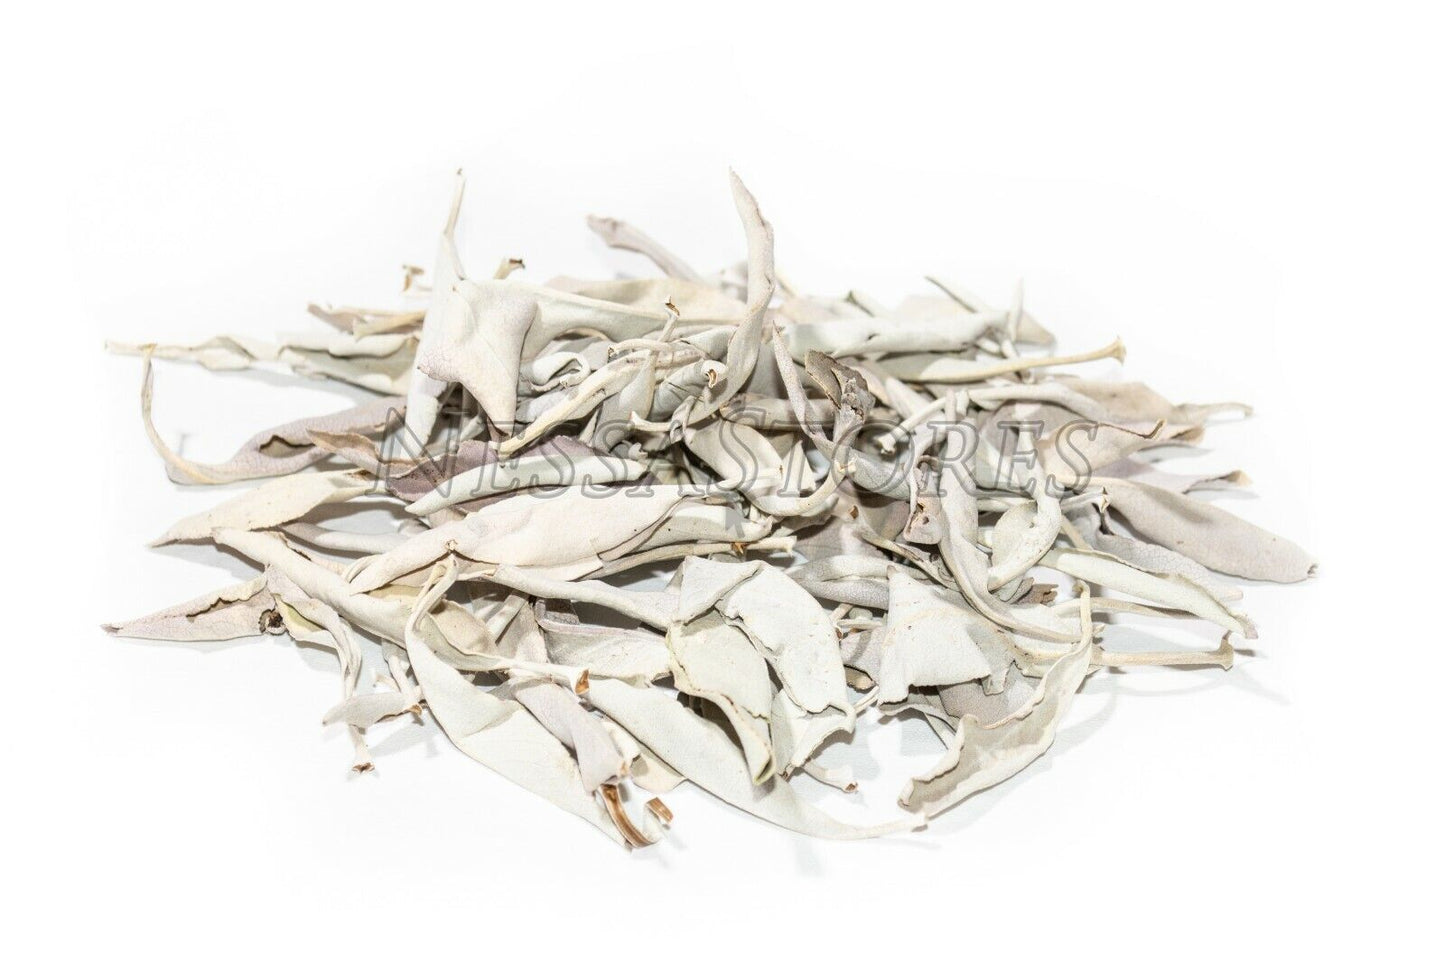 NessaStores California White Sage LEAVES ONLY Incense ( 1/4 lb) #JC-3